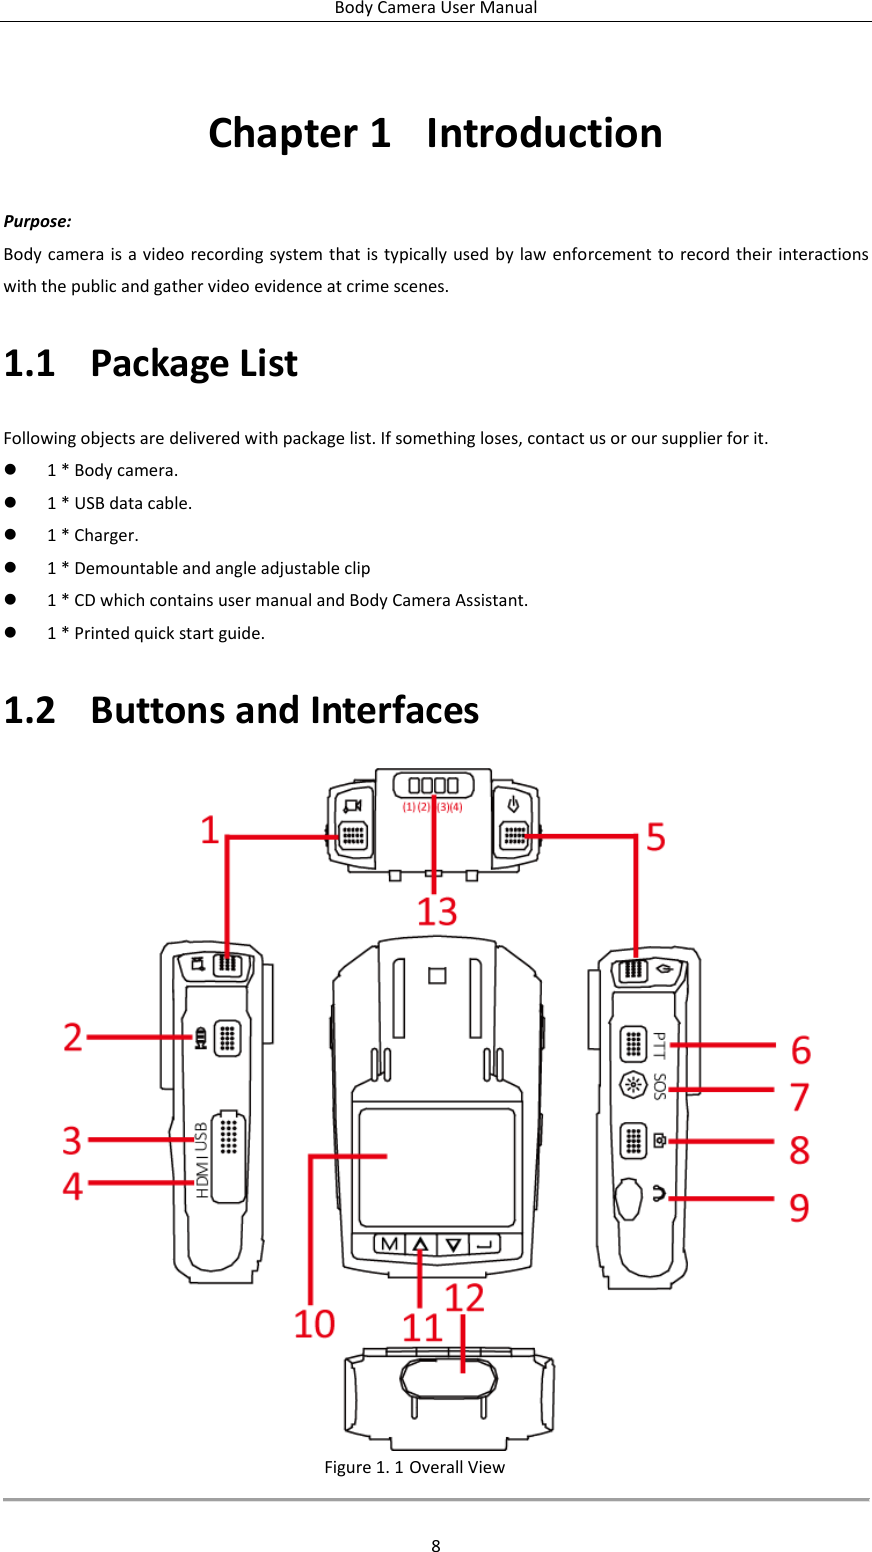 Body Camera User Manual 8 Chapter 1  Introduction Purpose: Body camera is a  video recording system that is typically used by law enforcement to  record their interactions with the public and gather video evidence at crime scenes.   1.1 Package List Following objects are delivered with package list. If something loses, contact us or our supplier for it.  1 * Body camera.  1 * USB data cable.  1 * Charger.  1 * Demountable and angle adjustable clip  1 * CD which contains user manual and Body Camera Assistant.  1 * Printed quick start guide. 1.2 Buttons and Interfaces  Figure 1. 1 Overall View  